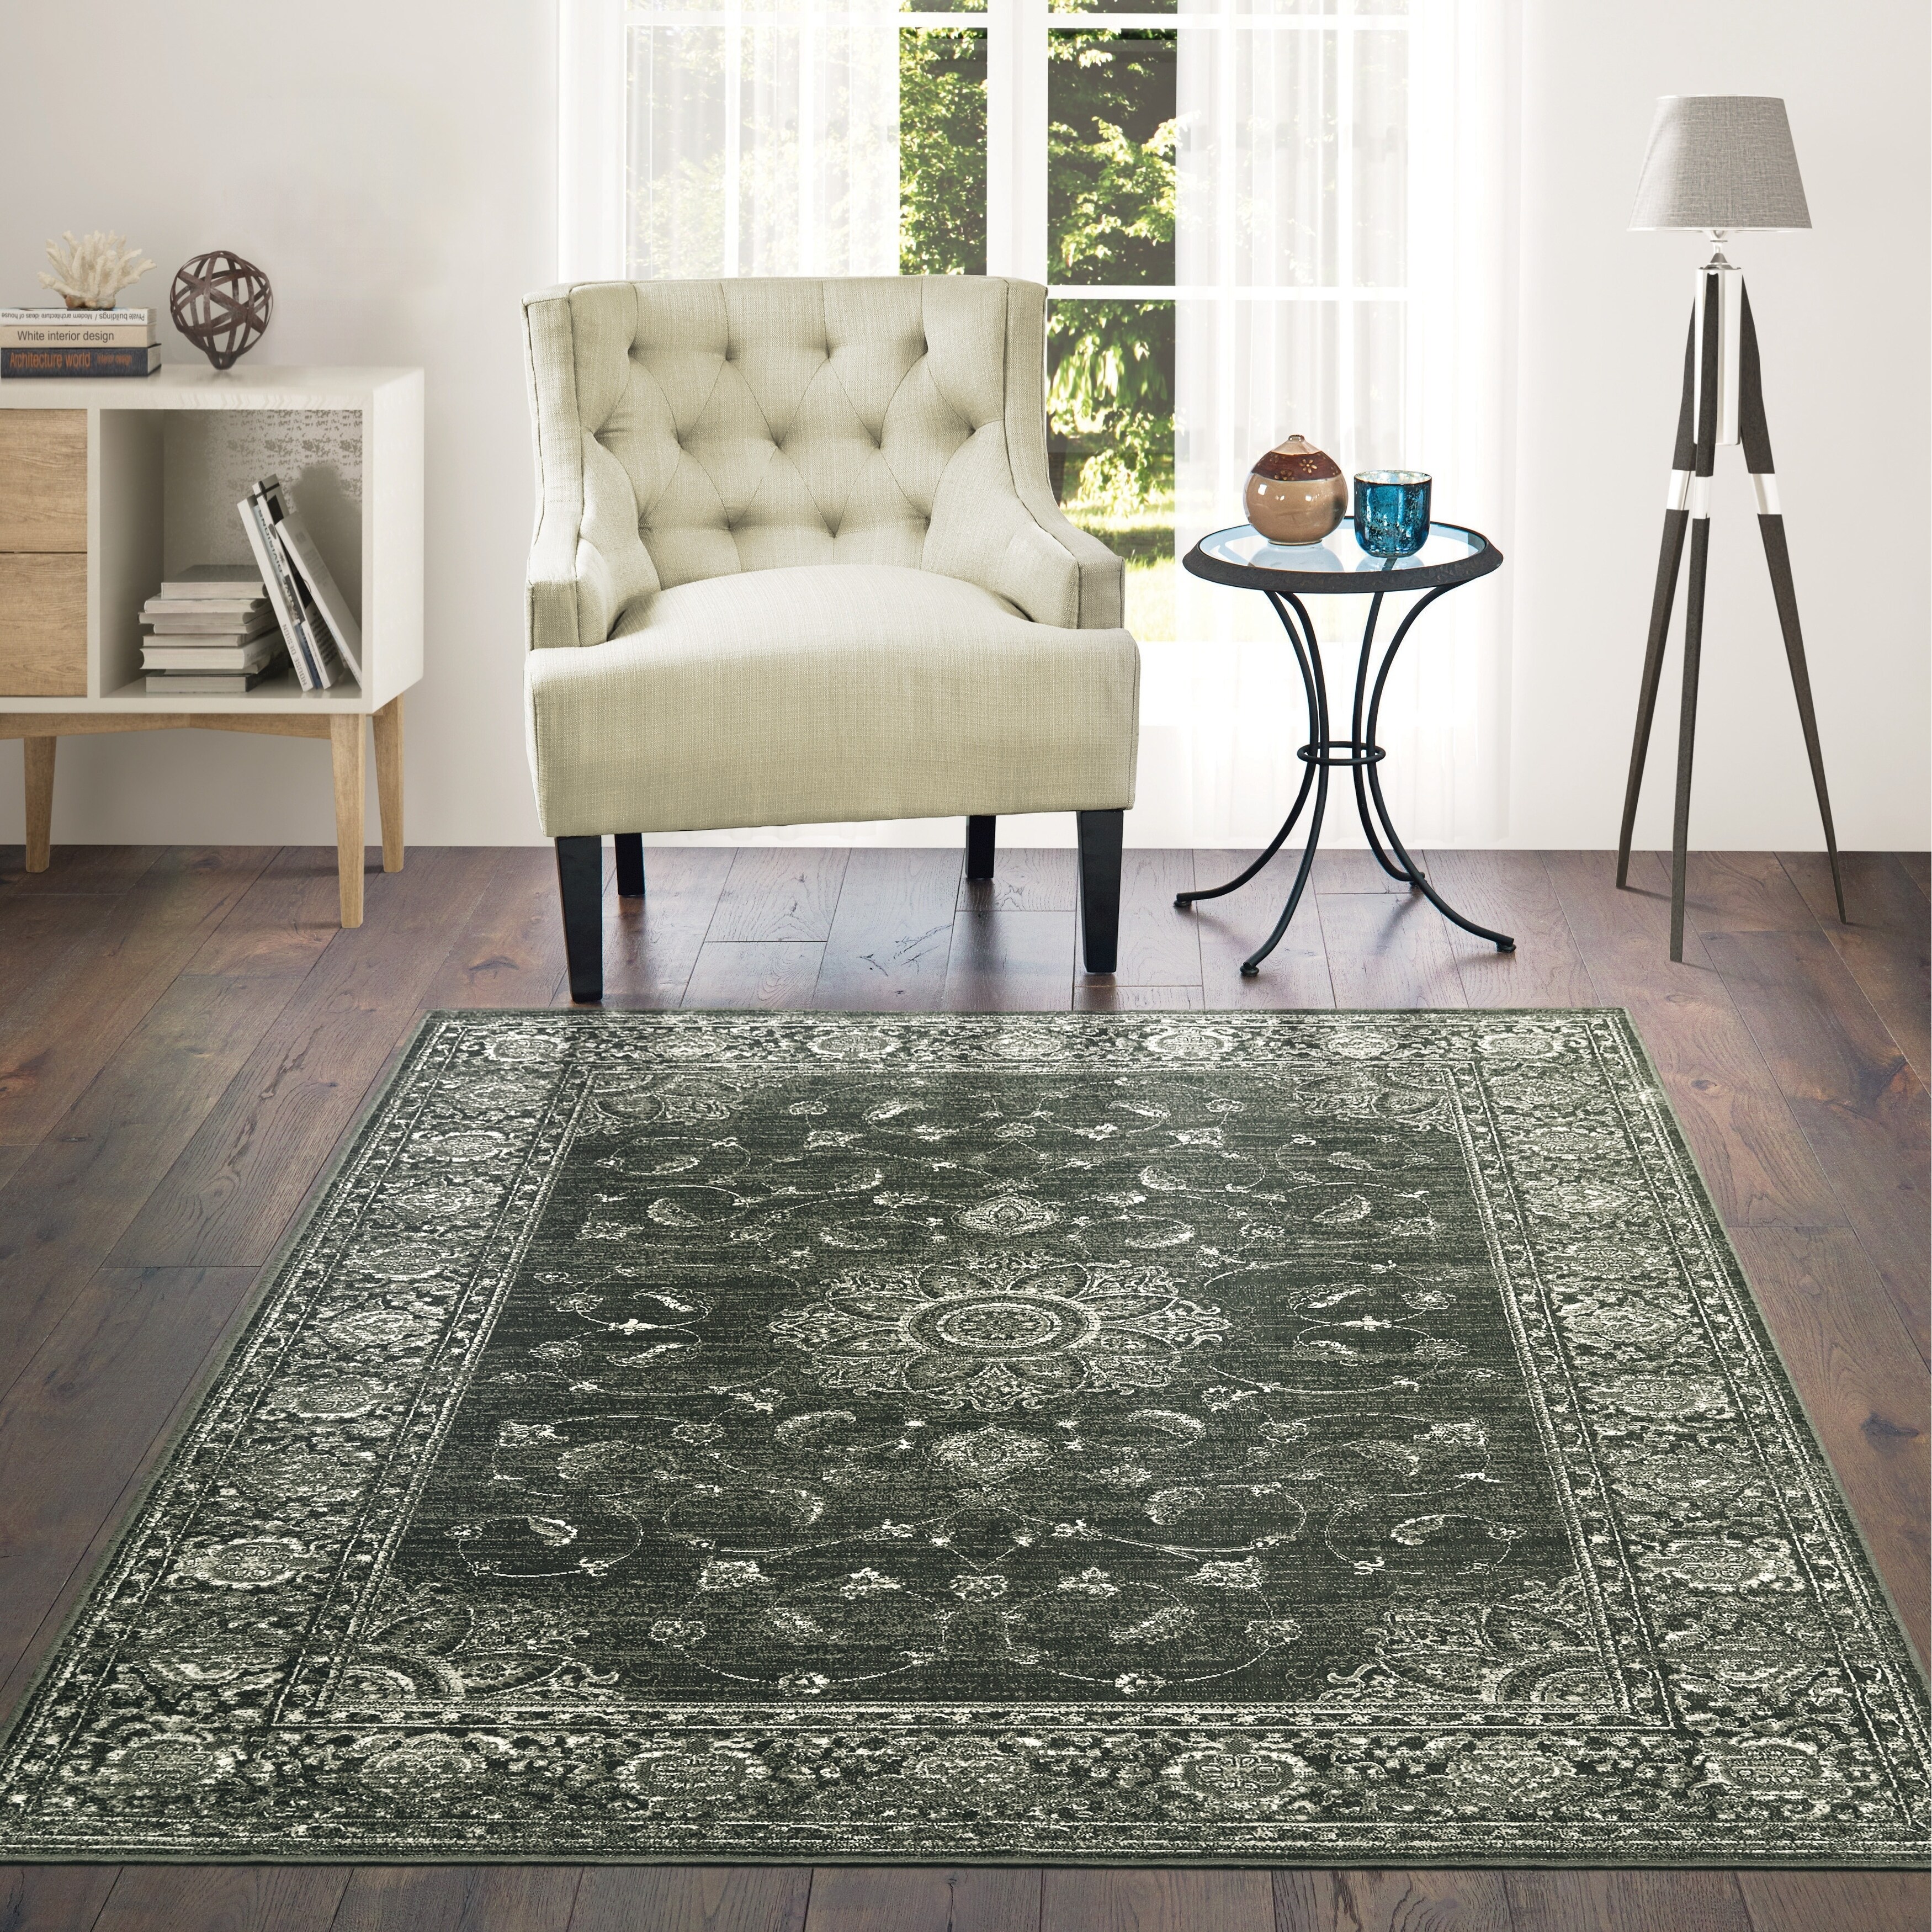 Shop Westfield Home Lelaliah Camael Smoke Faux Silk Area Rug 10 X 14 On Sale Free Shipping Today Overstock